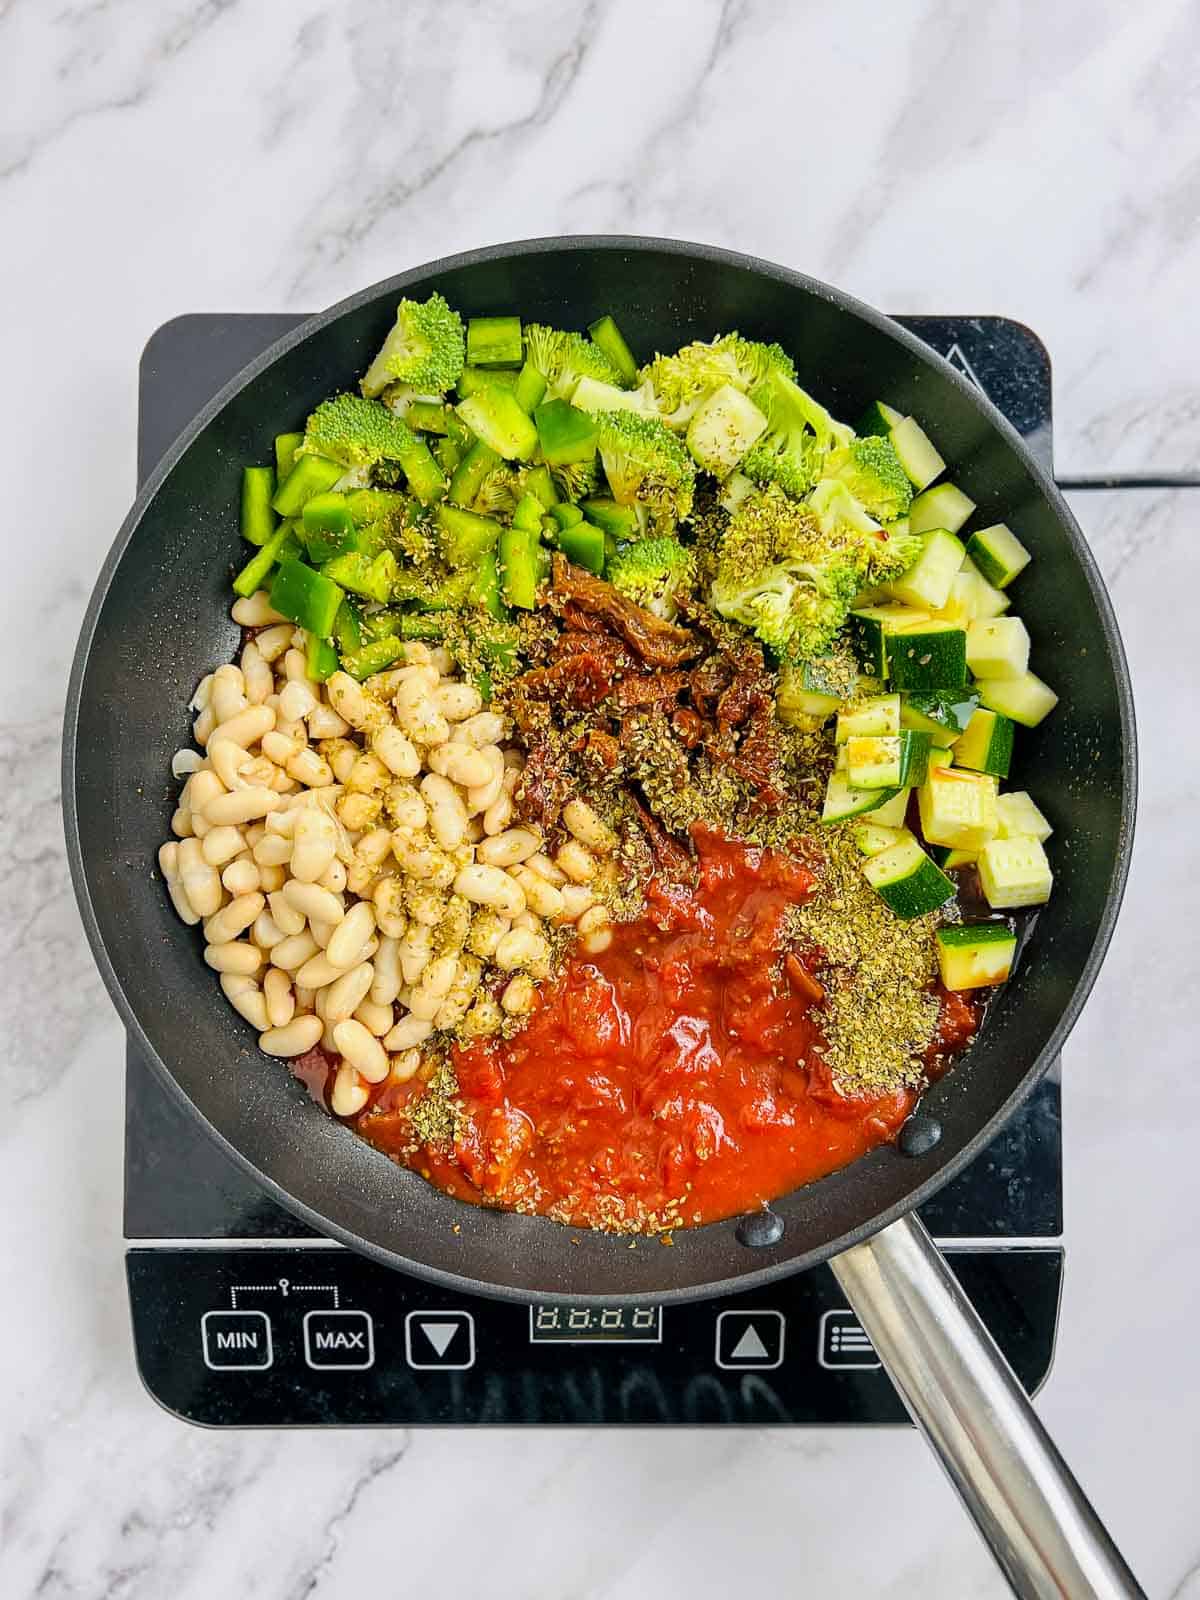 White beans, veggies, tomatoes, and spices in the skillet.